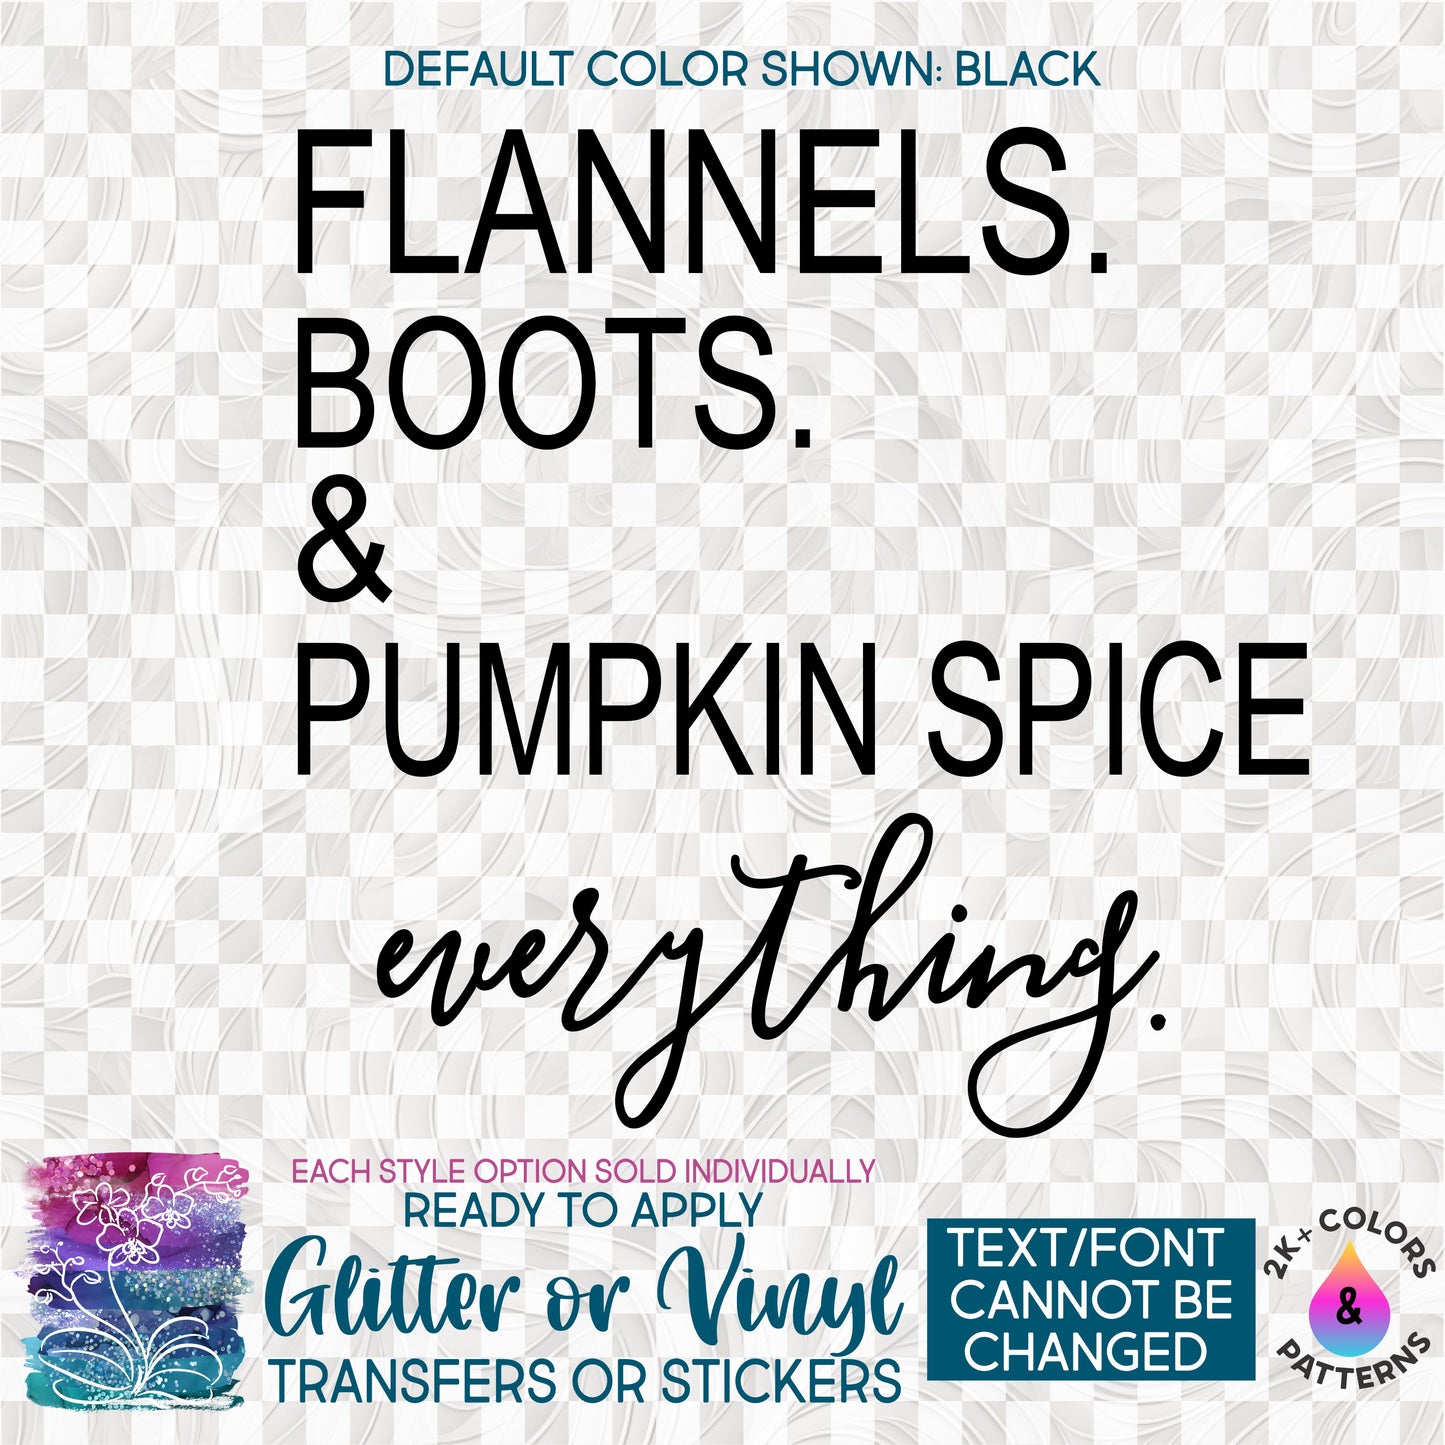 s354-2D Flannels Boots & Pumpkin Spice Everything Made-to-Order Iron-On Transfer or Sticker